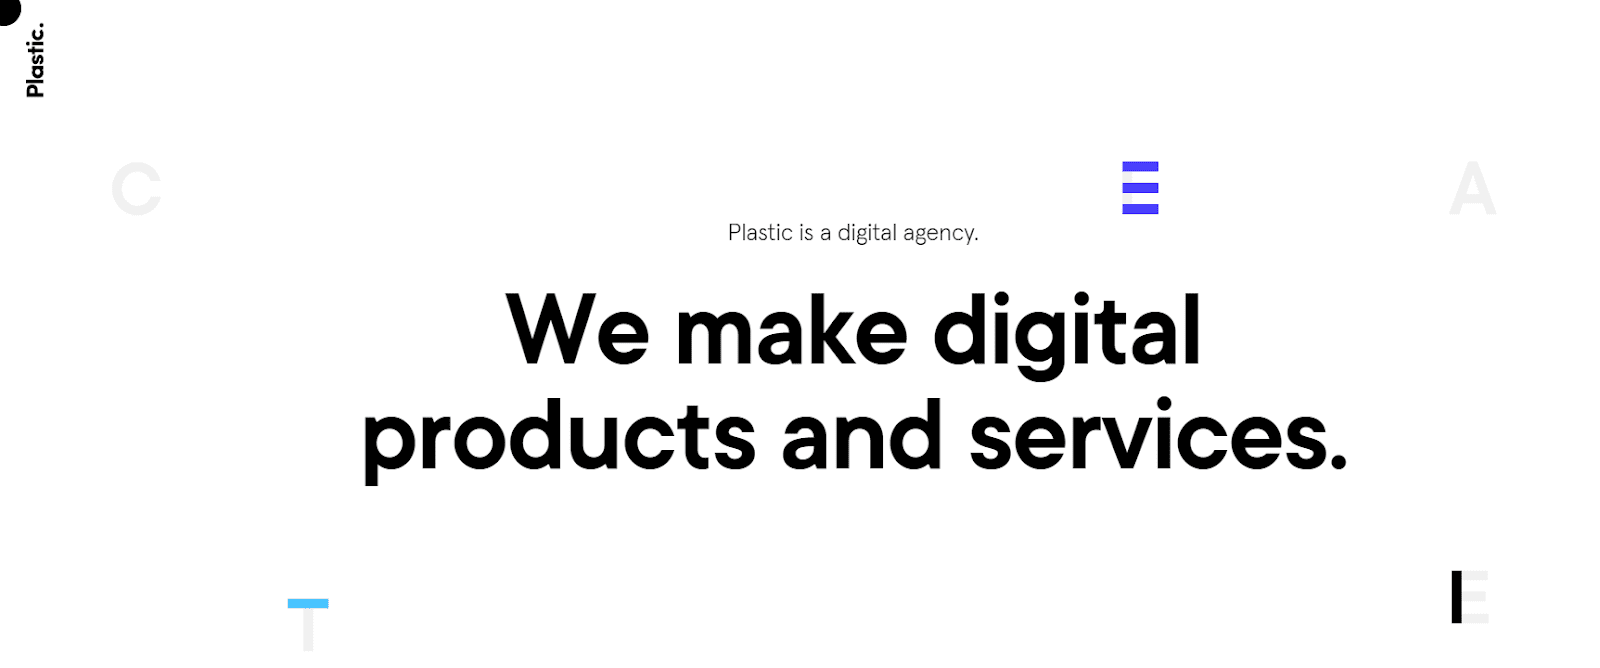 We make digital products and services.